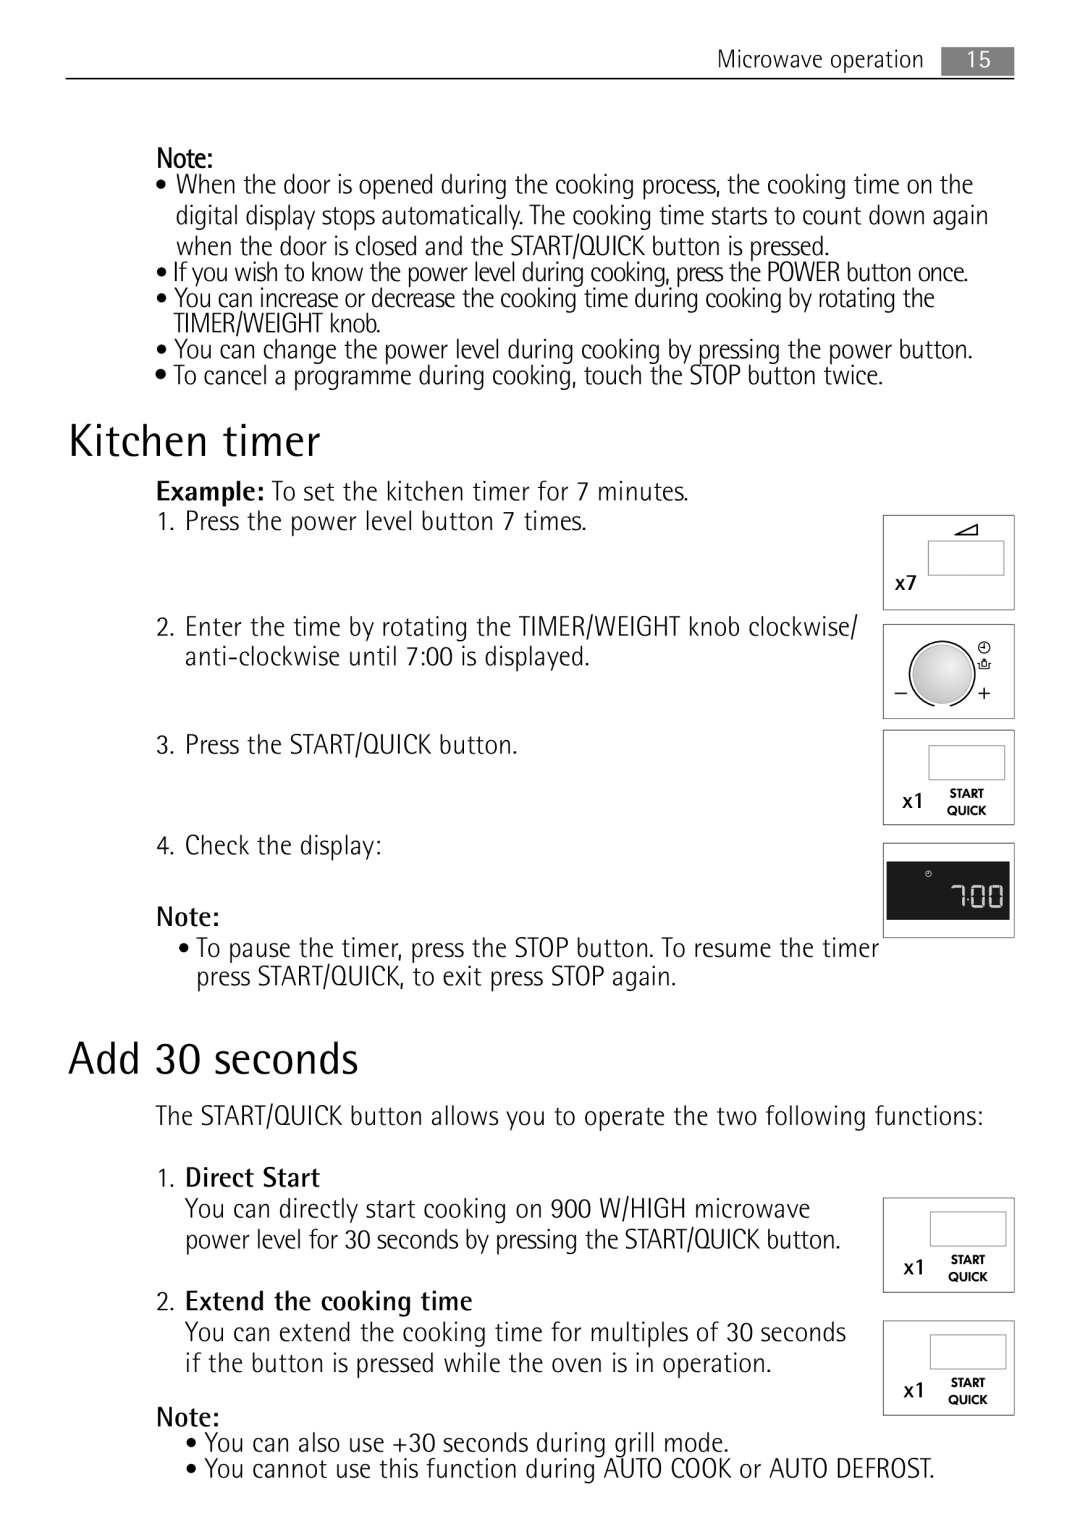 AEG MCD2662E user manual Kitchen timer, Add 30 seconds, Direct Start, Extend the cooking time 